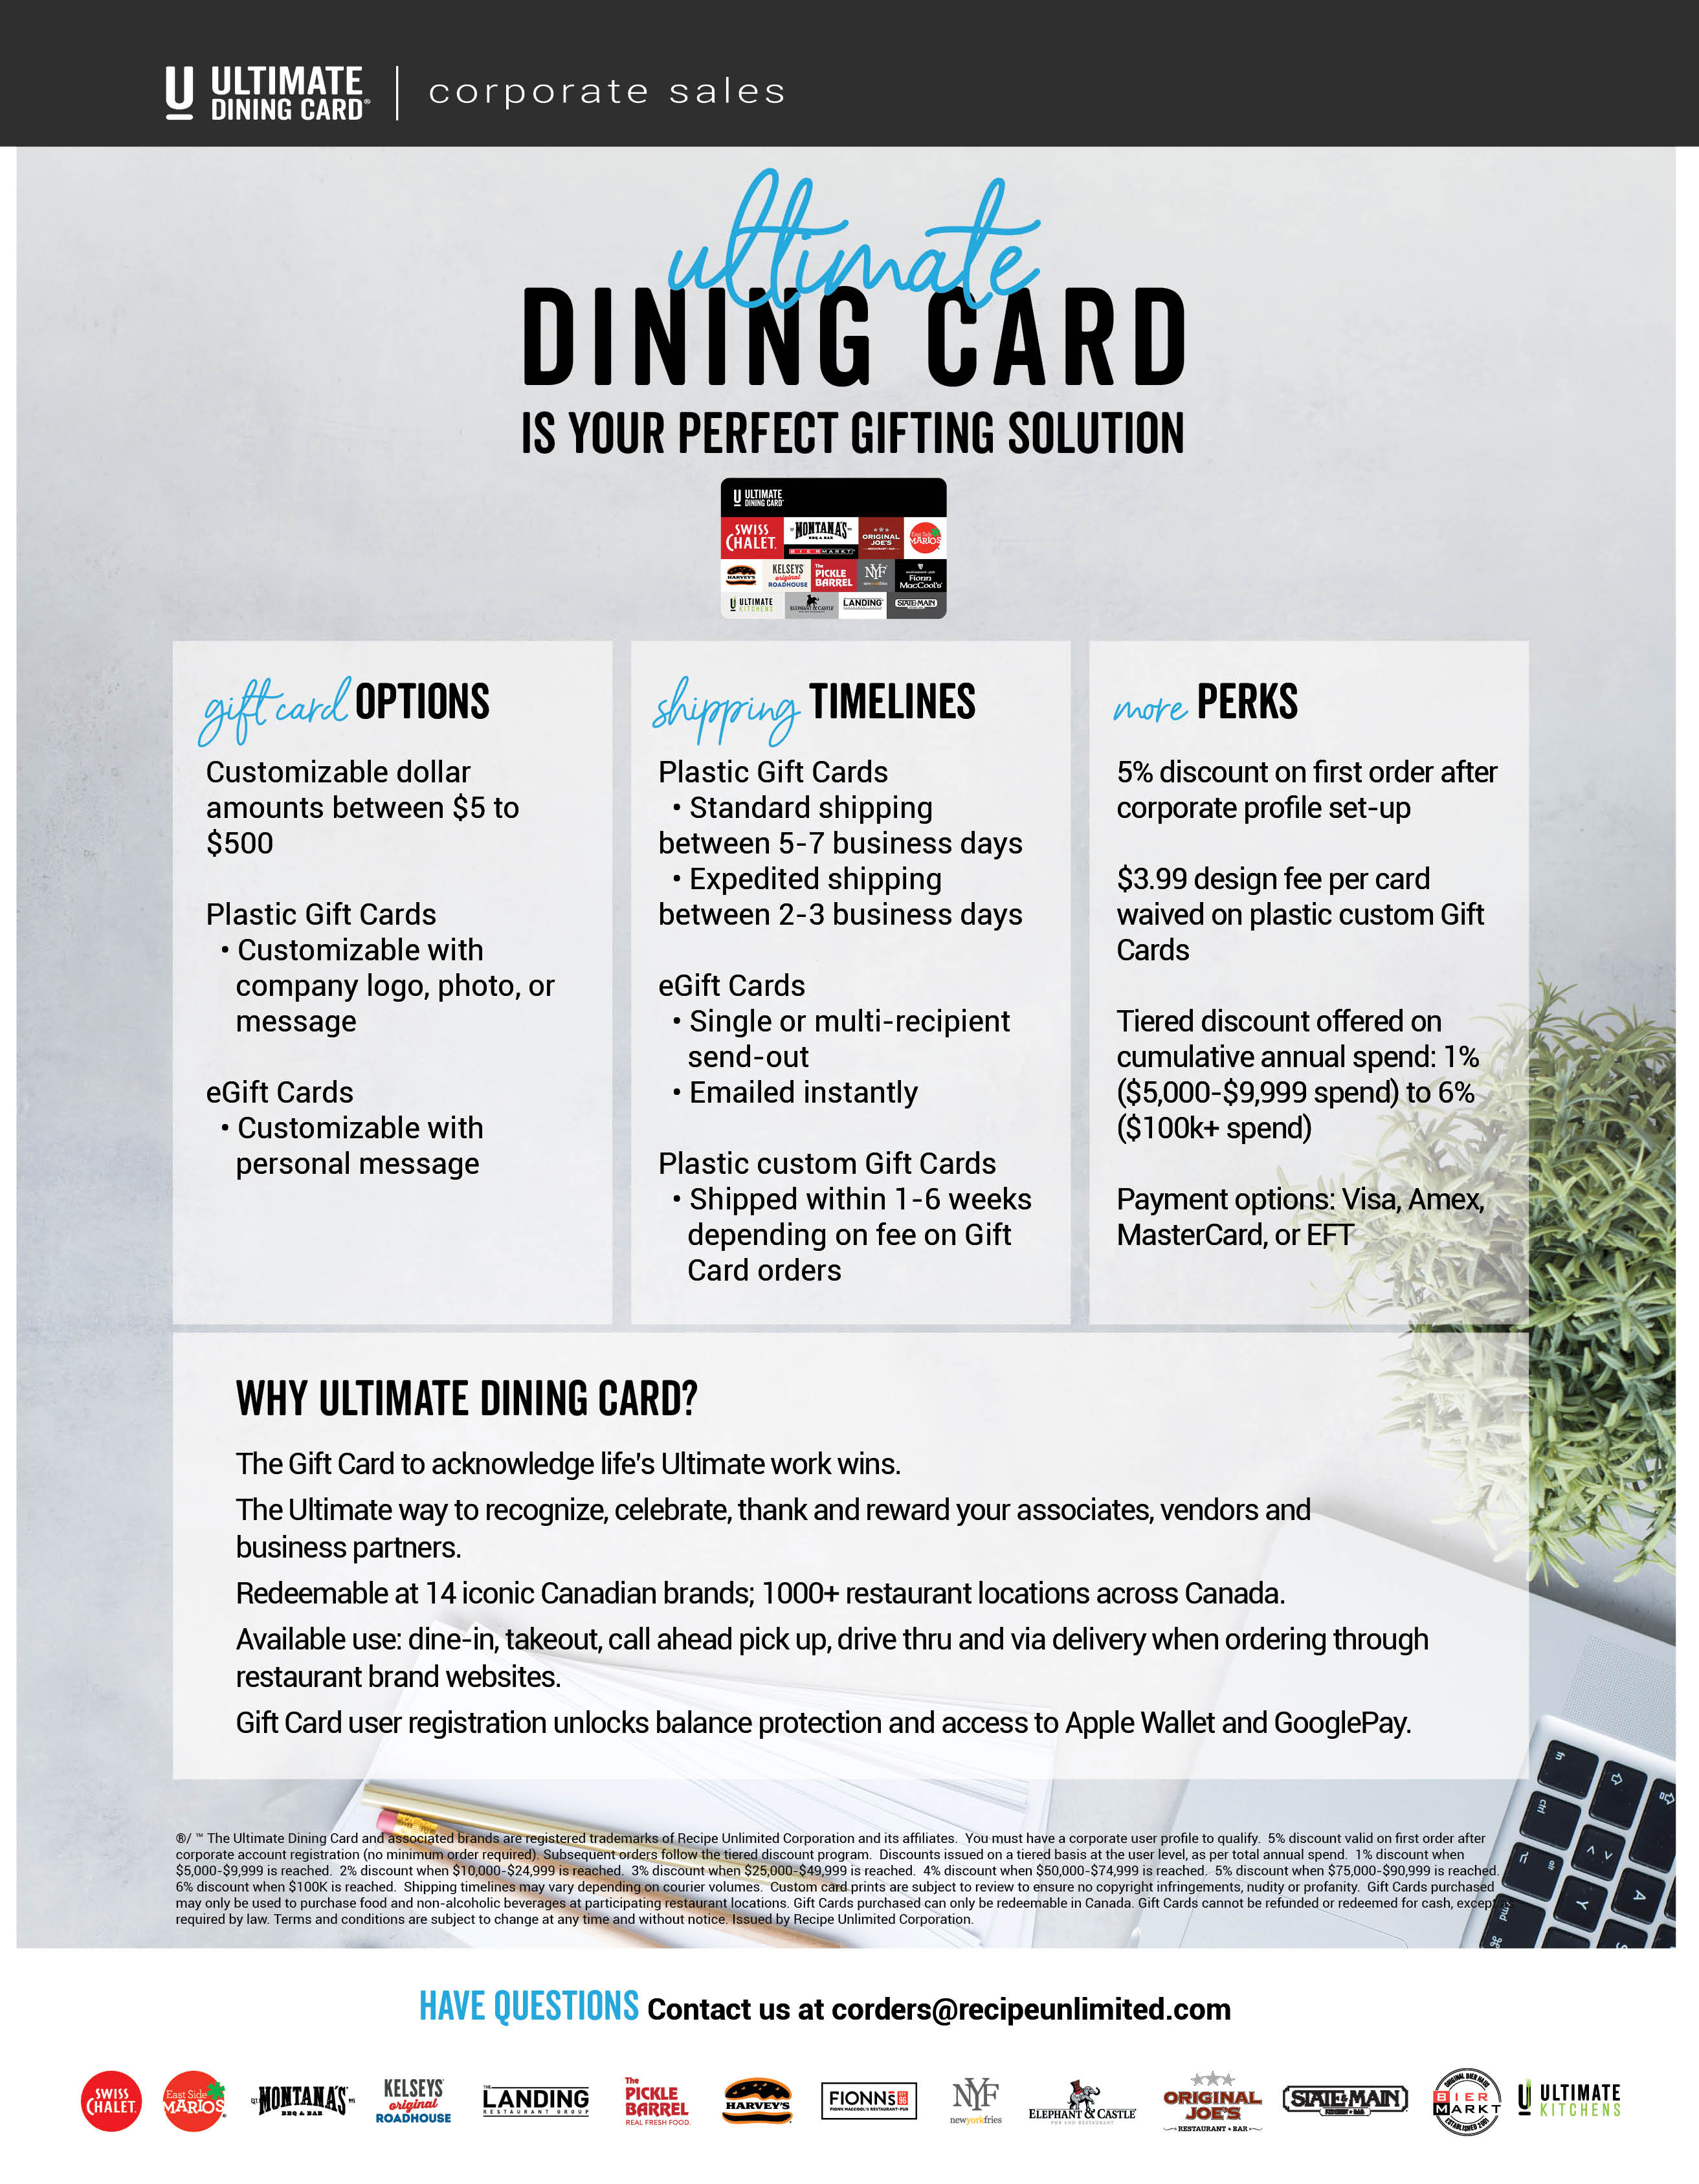 Sign up today for an Ultimate Dining Card Corporate Account.